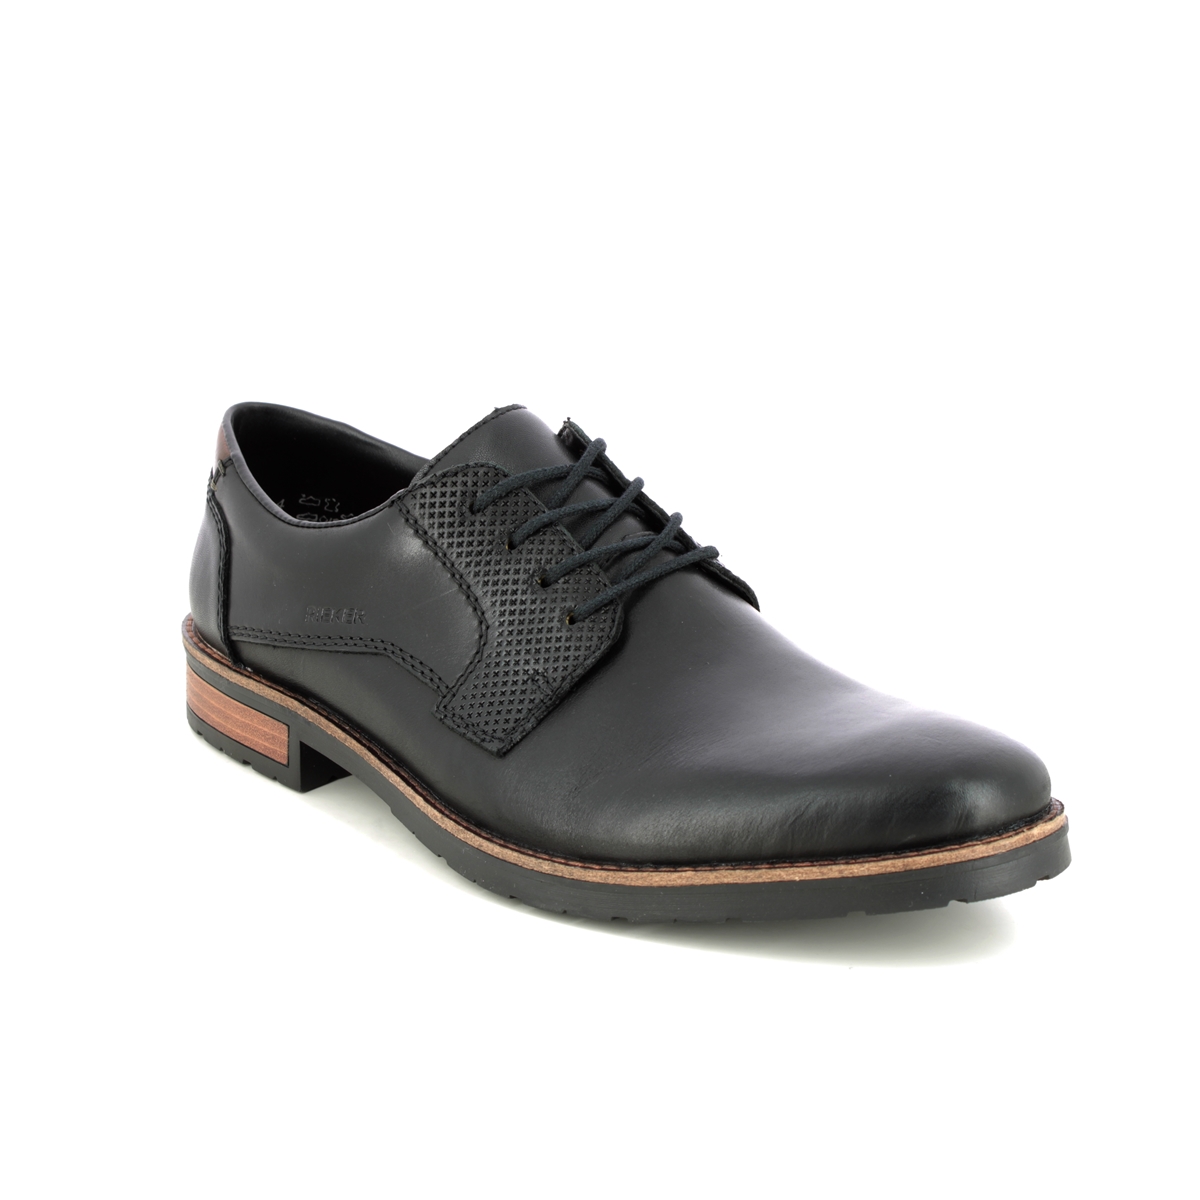 Rieker Claradam Black Leather Mens Formal Shoes 14601-00 In Size 41 In Plain Black Leather